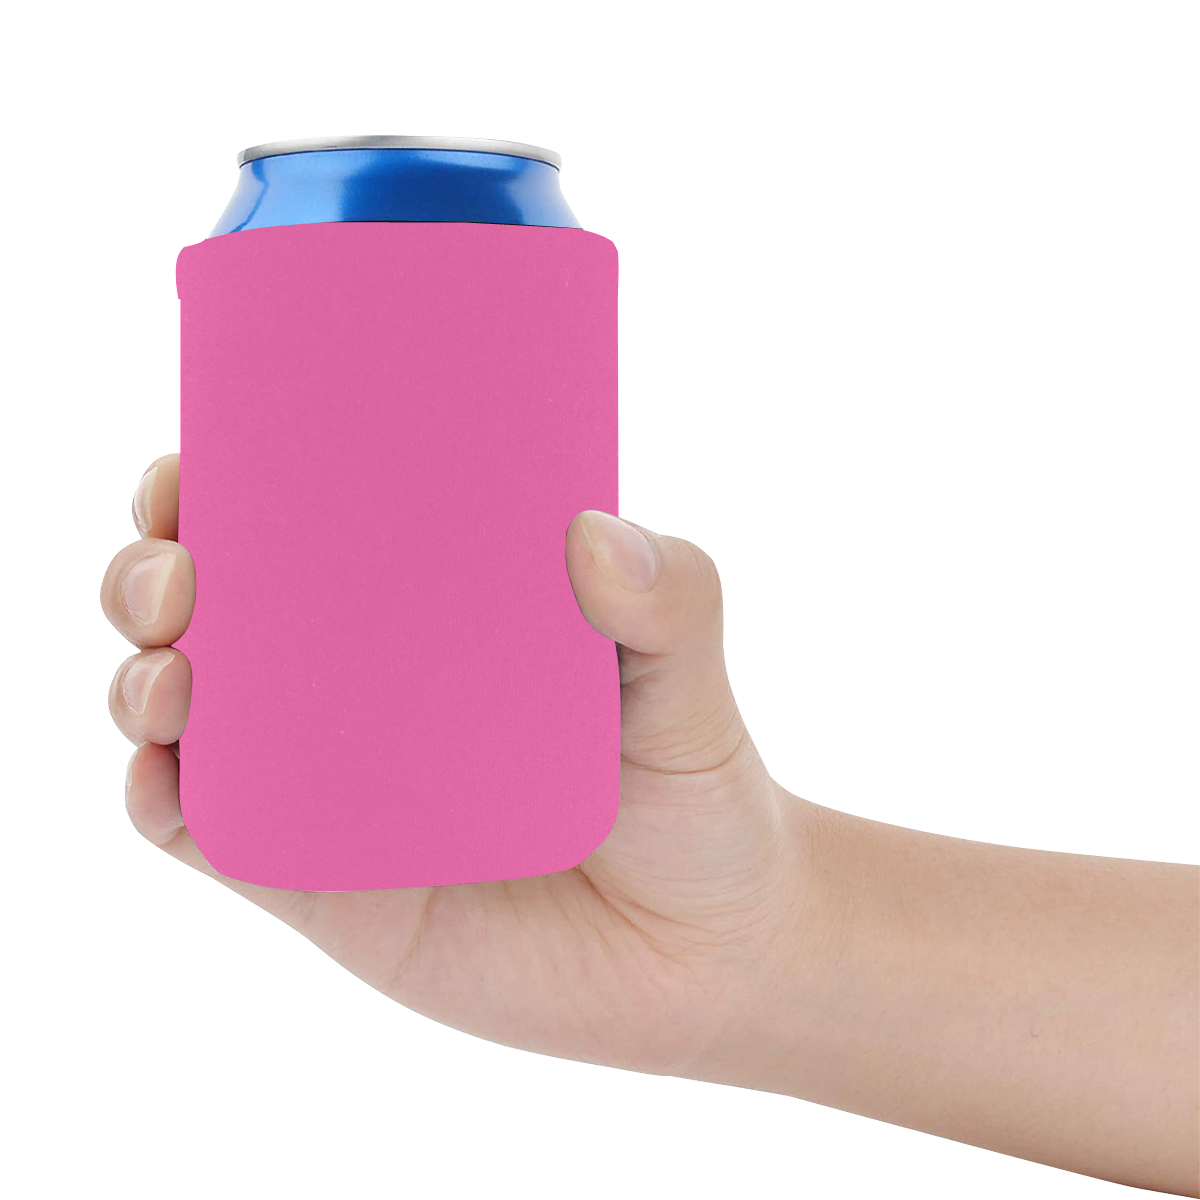 color hotpink Neoprene Can Cooler 4" x 2.7" dia.